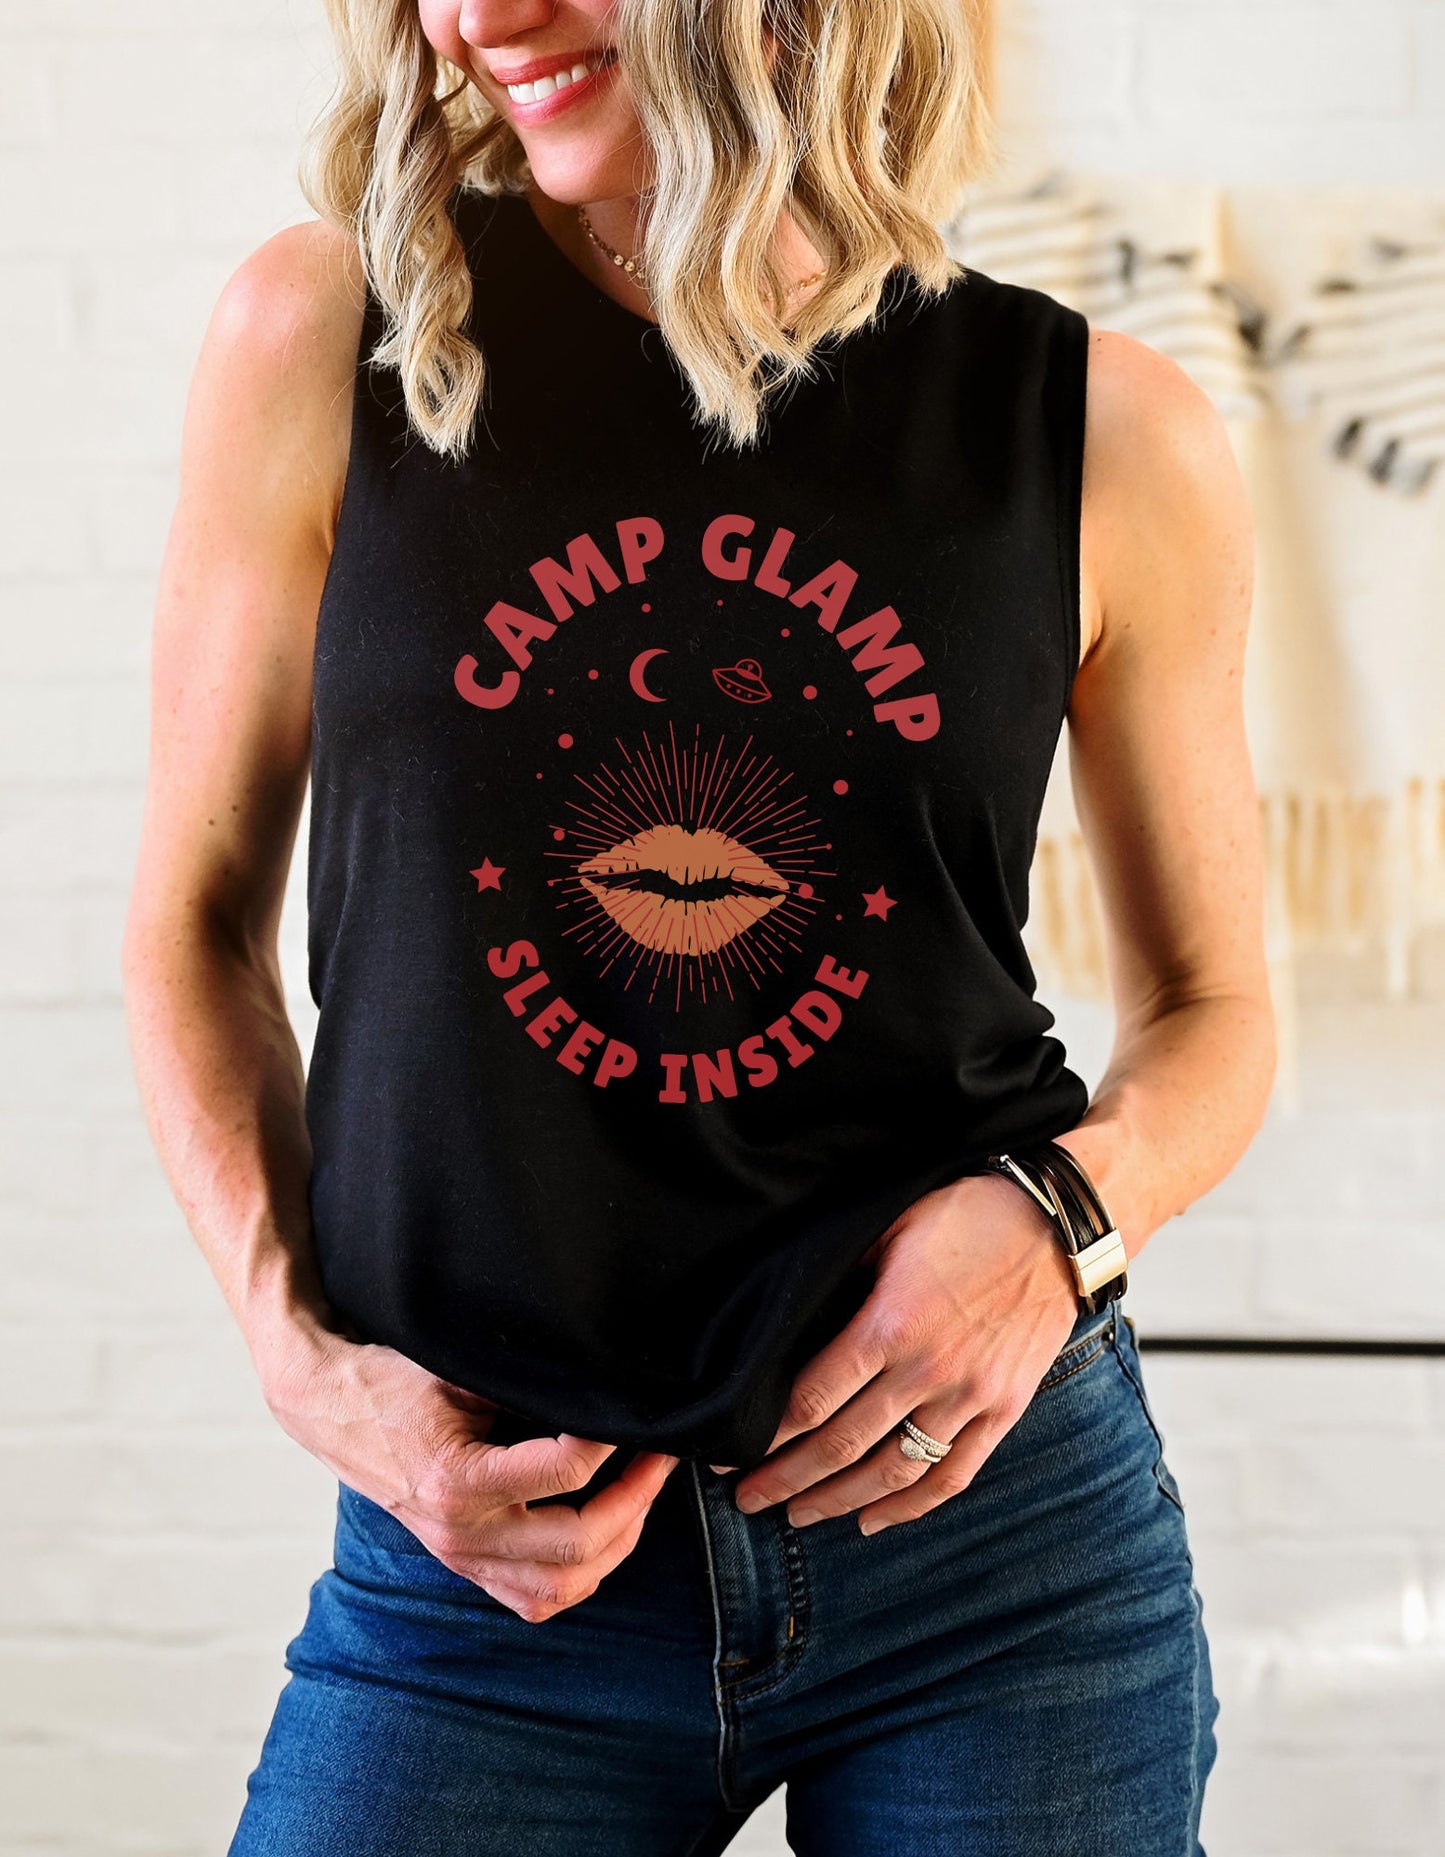 Camp Glamp Camping Glamping TShirt Retro Camper Glamper Gift Shirt Star Girl Aesthetic Tank Top Witchy Style Cute Glamping Party Muscle Tee